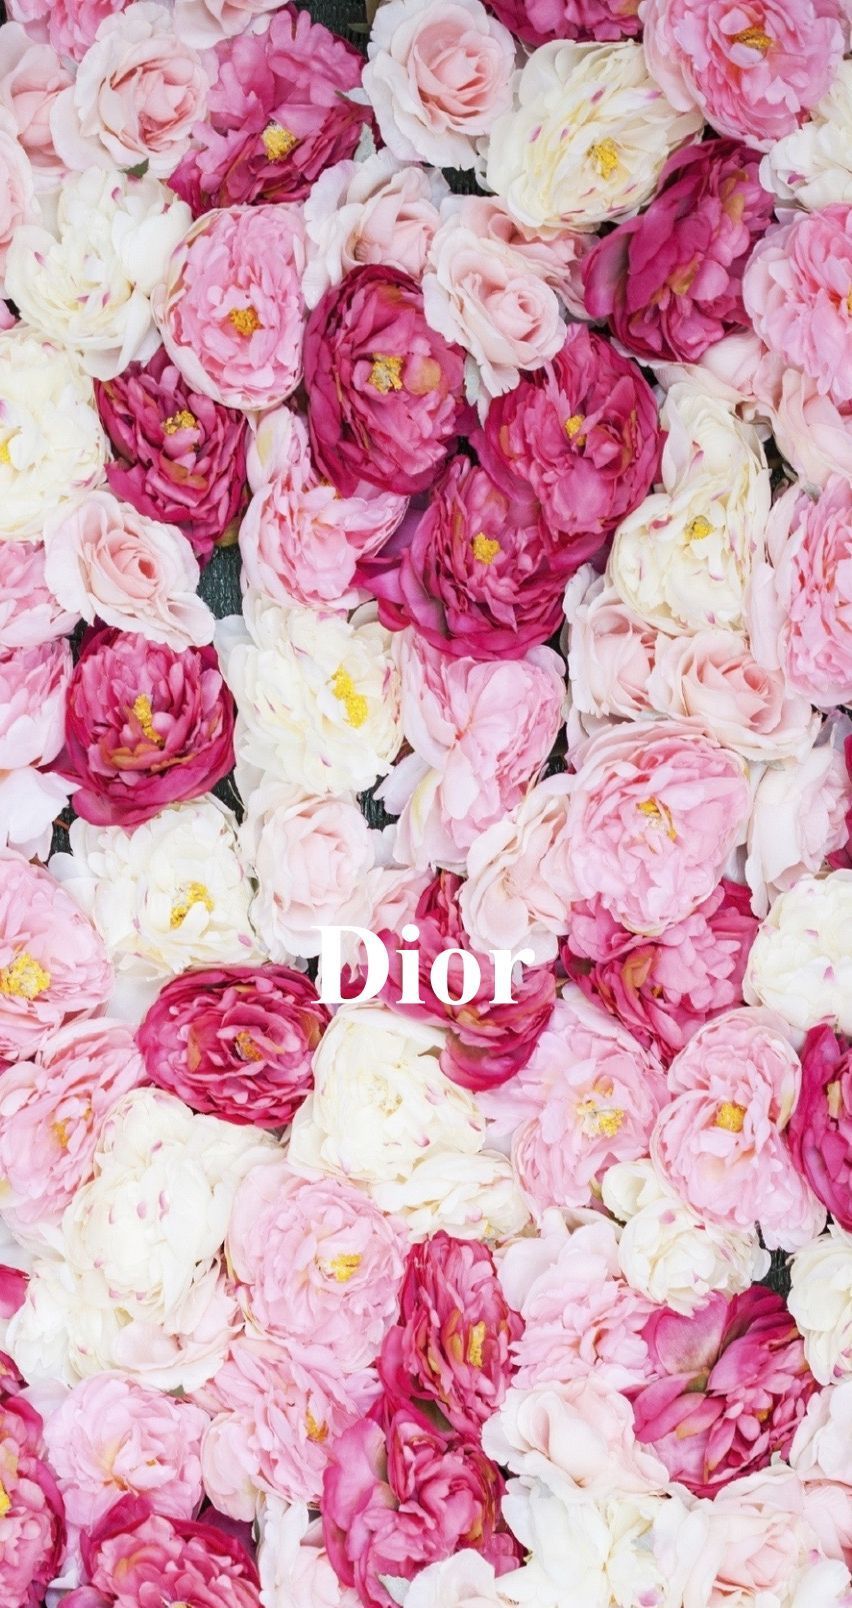 A close up of flowers with the word dior on them - Dior